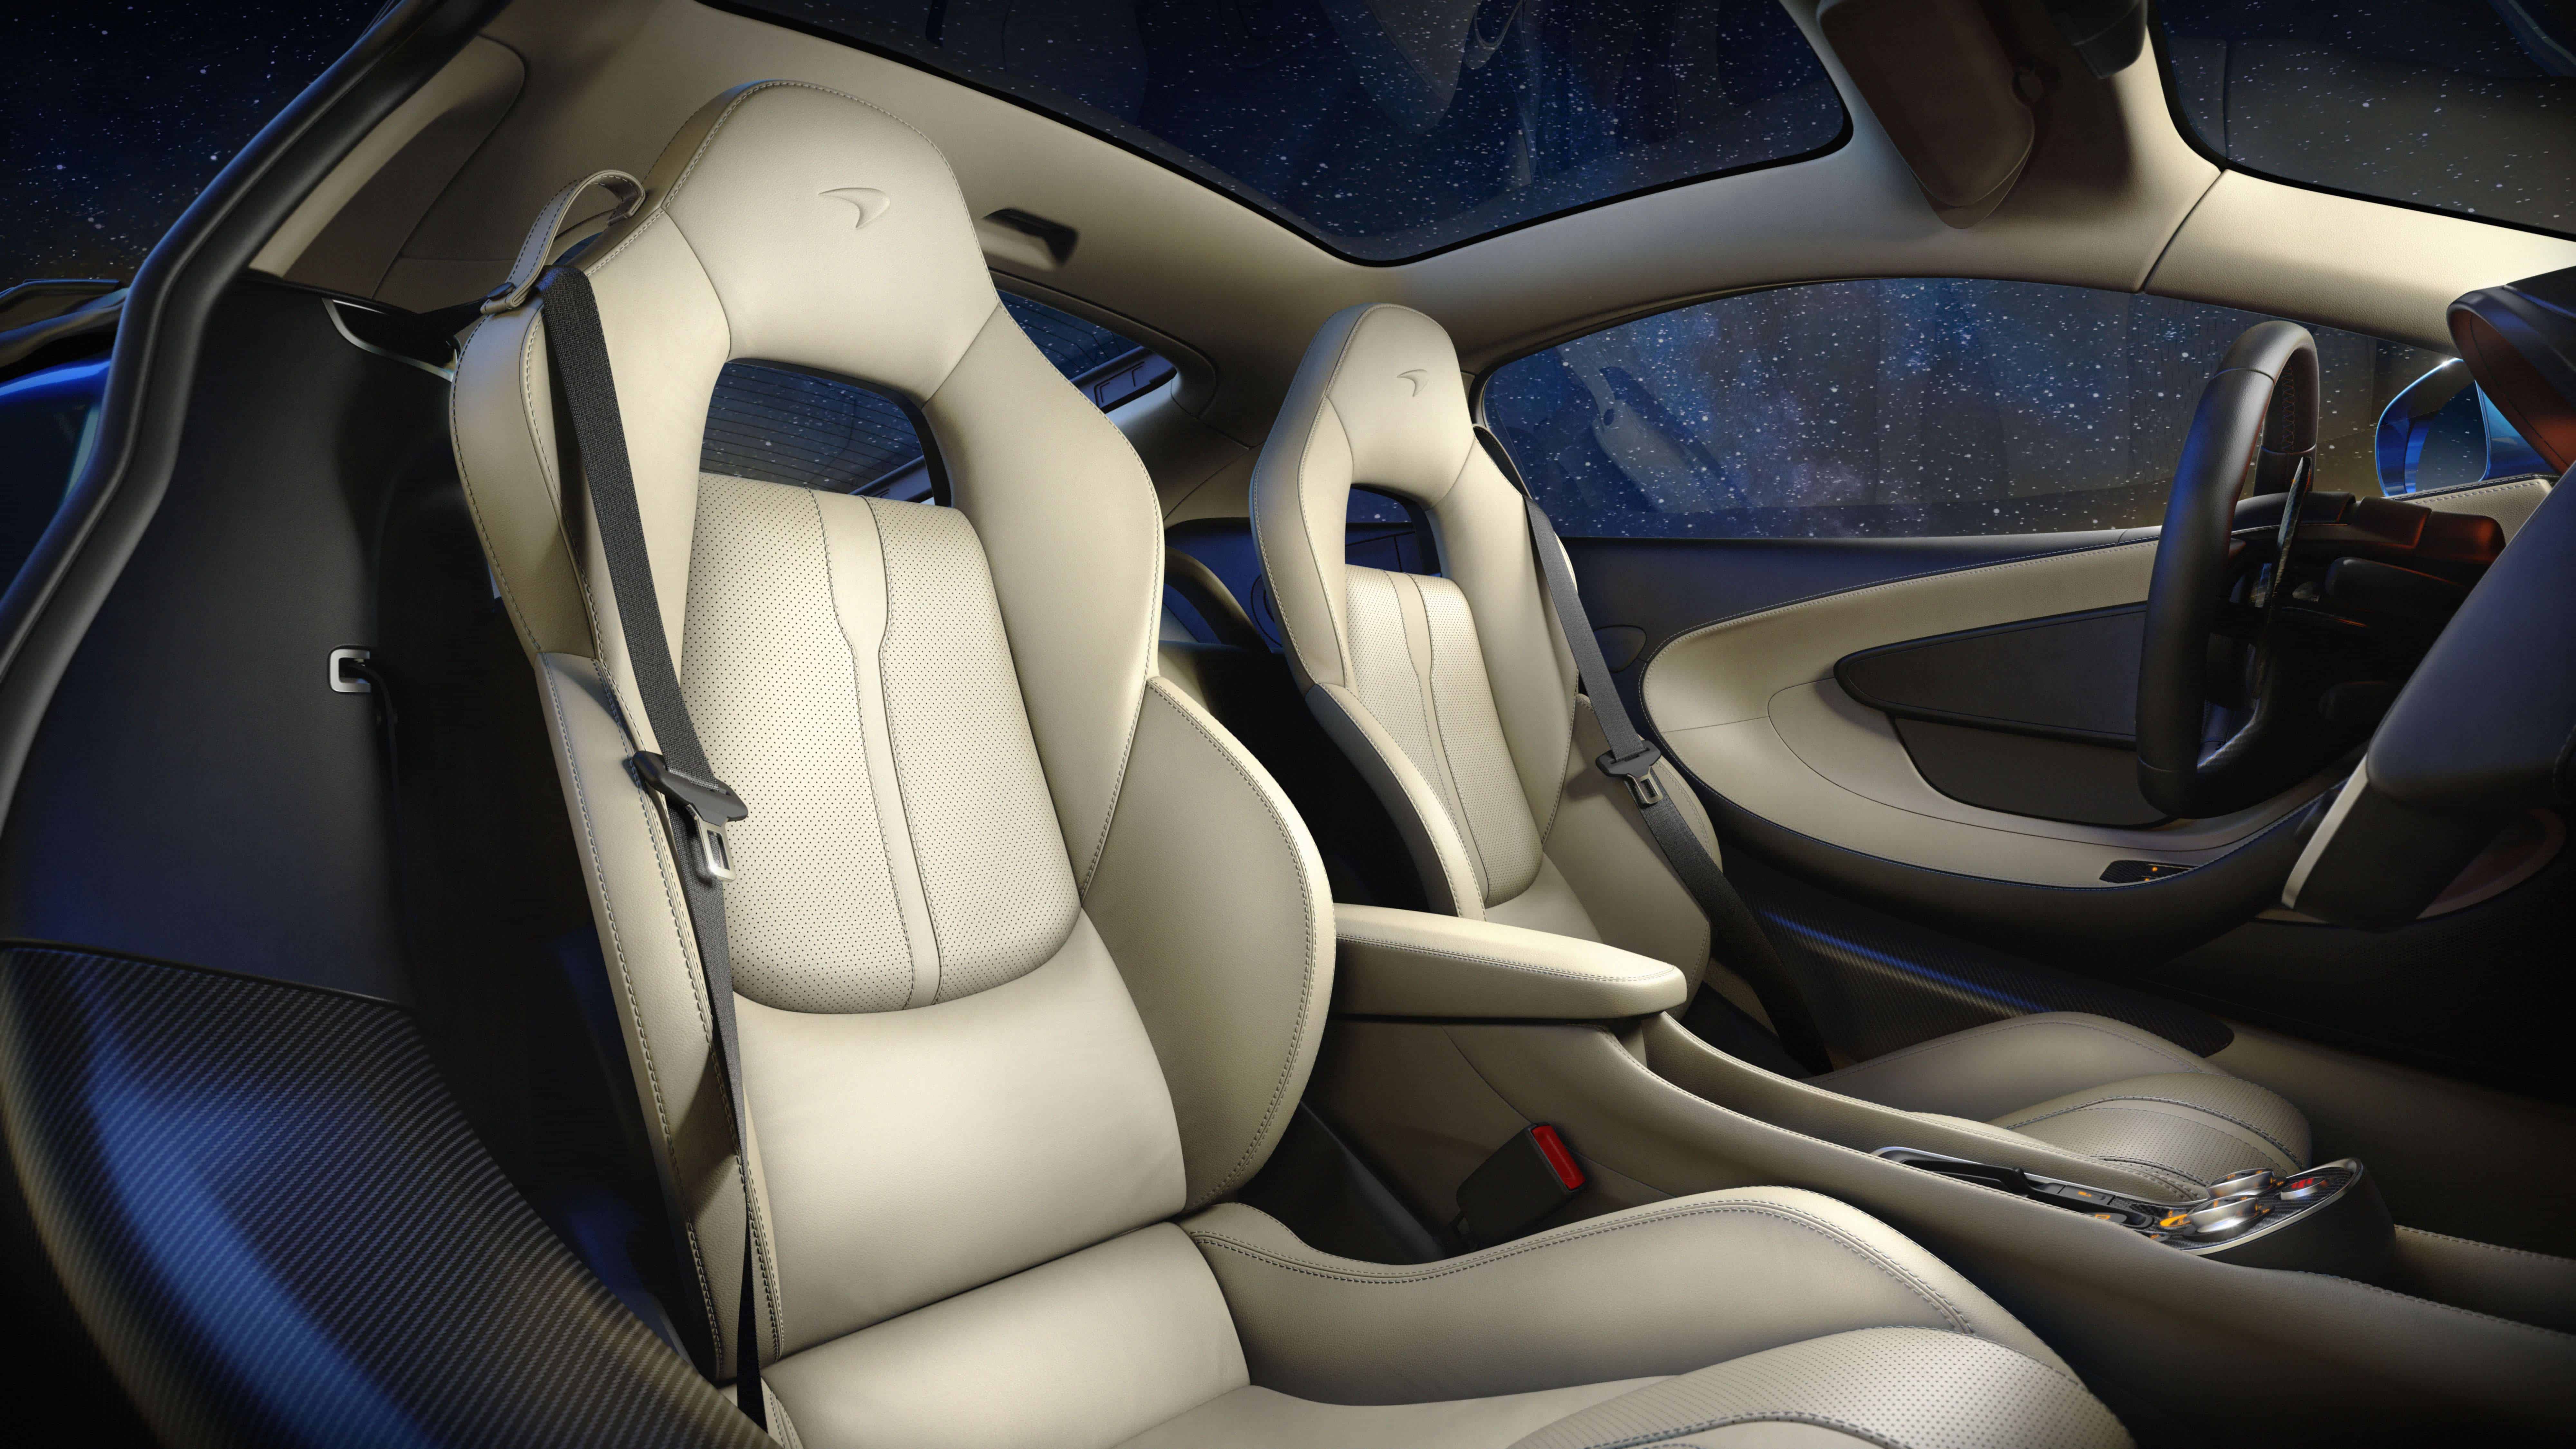 Leather-lined comfort in the GT cabin, and even a glove box